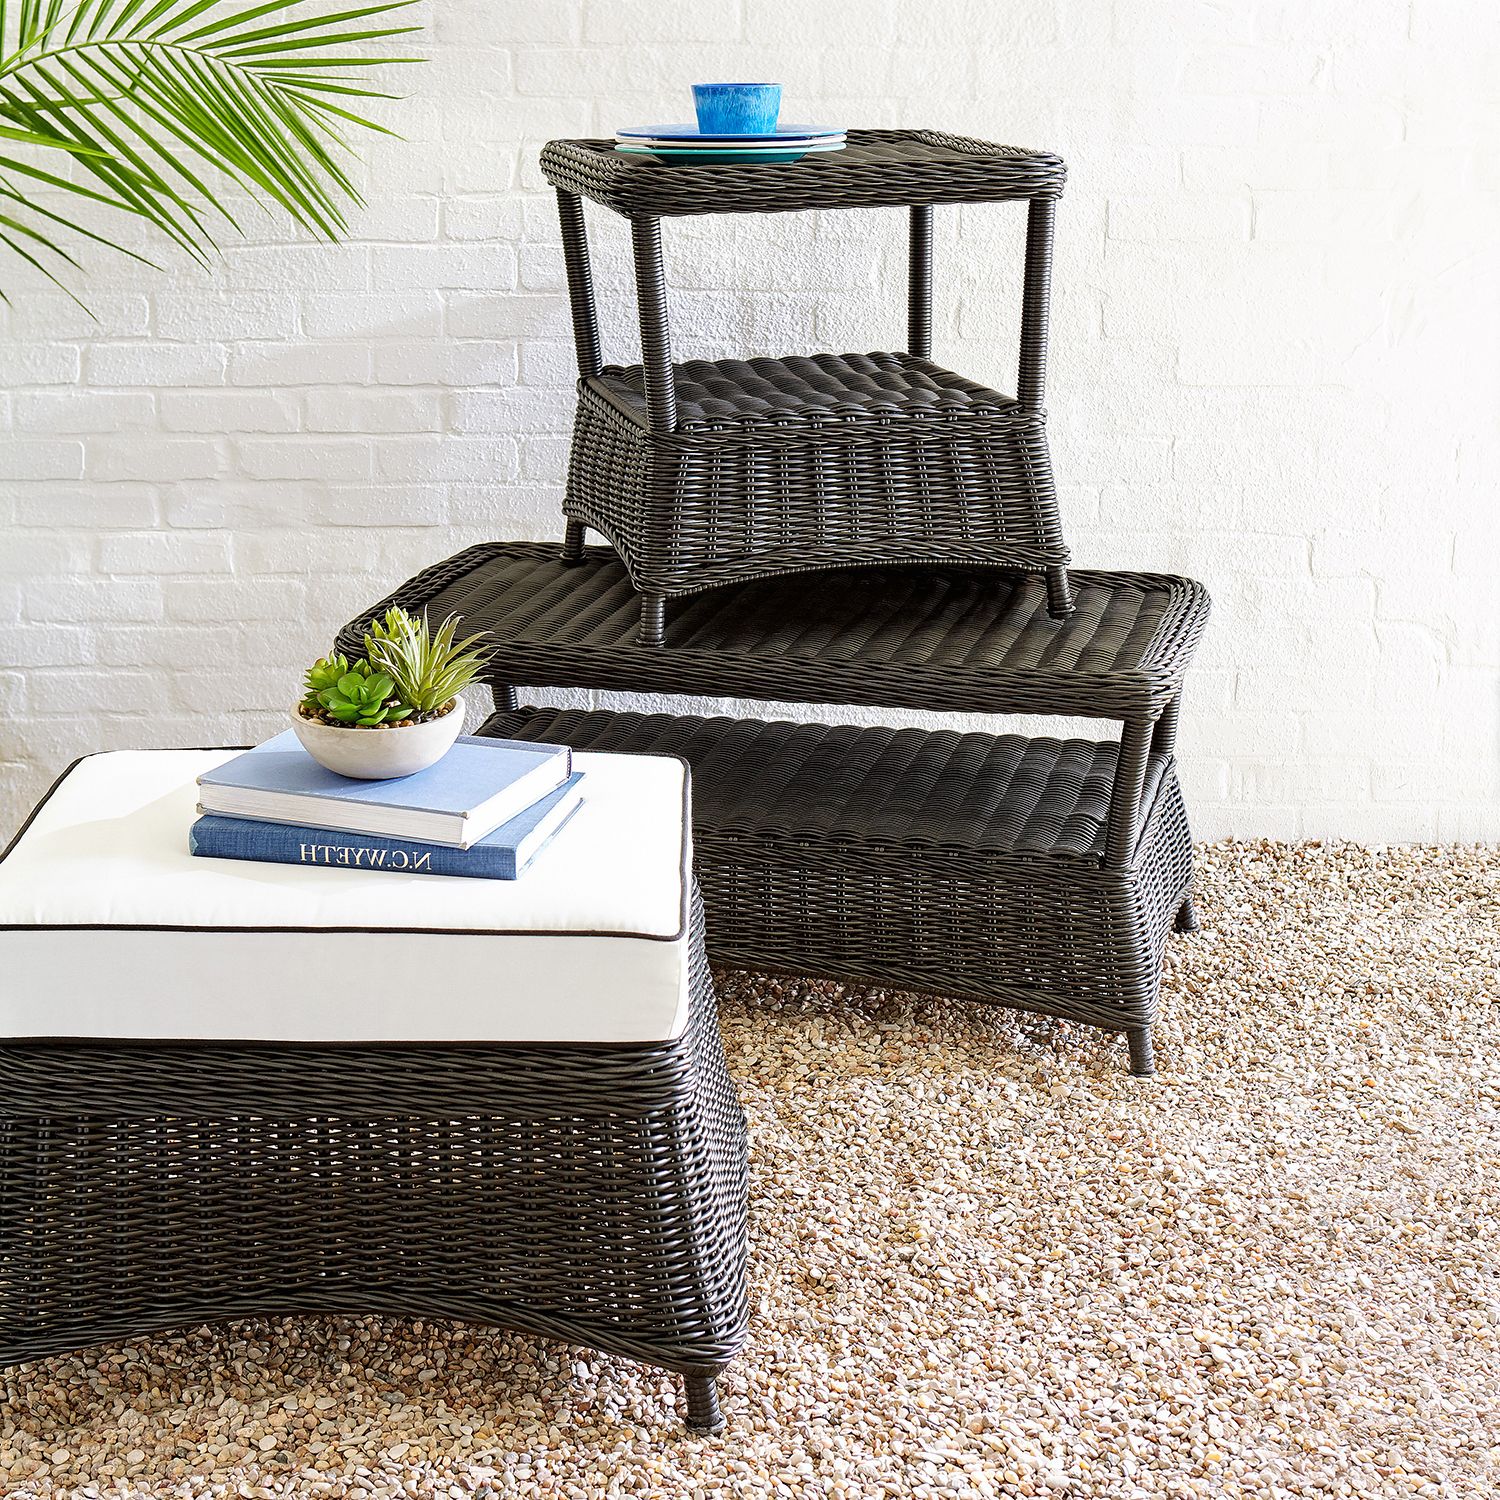 Black Wicker Ottoman With Cushion – Pier1 Throughout Favorite Black And Off White Rattan Ottomans (View 4 of 10)